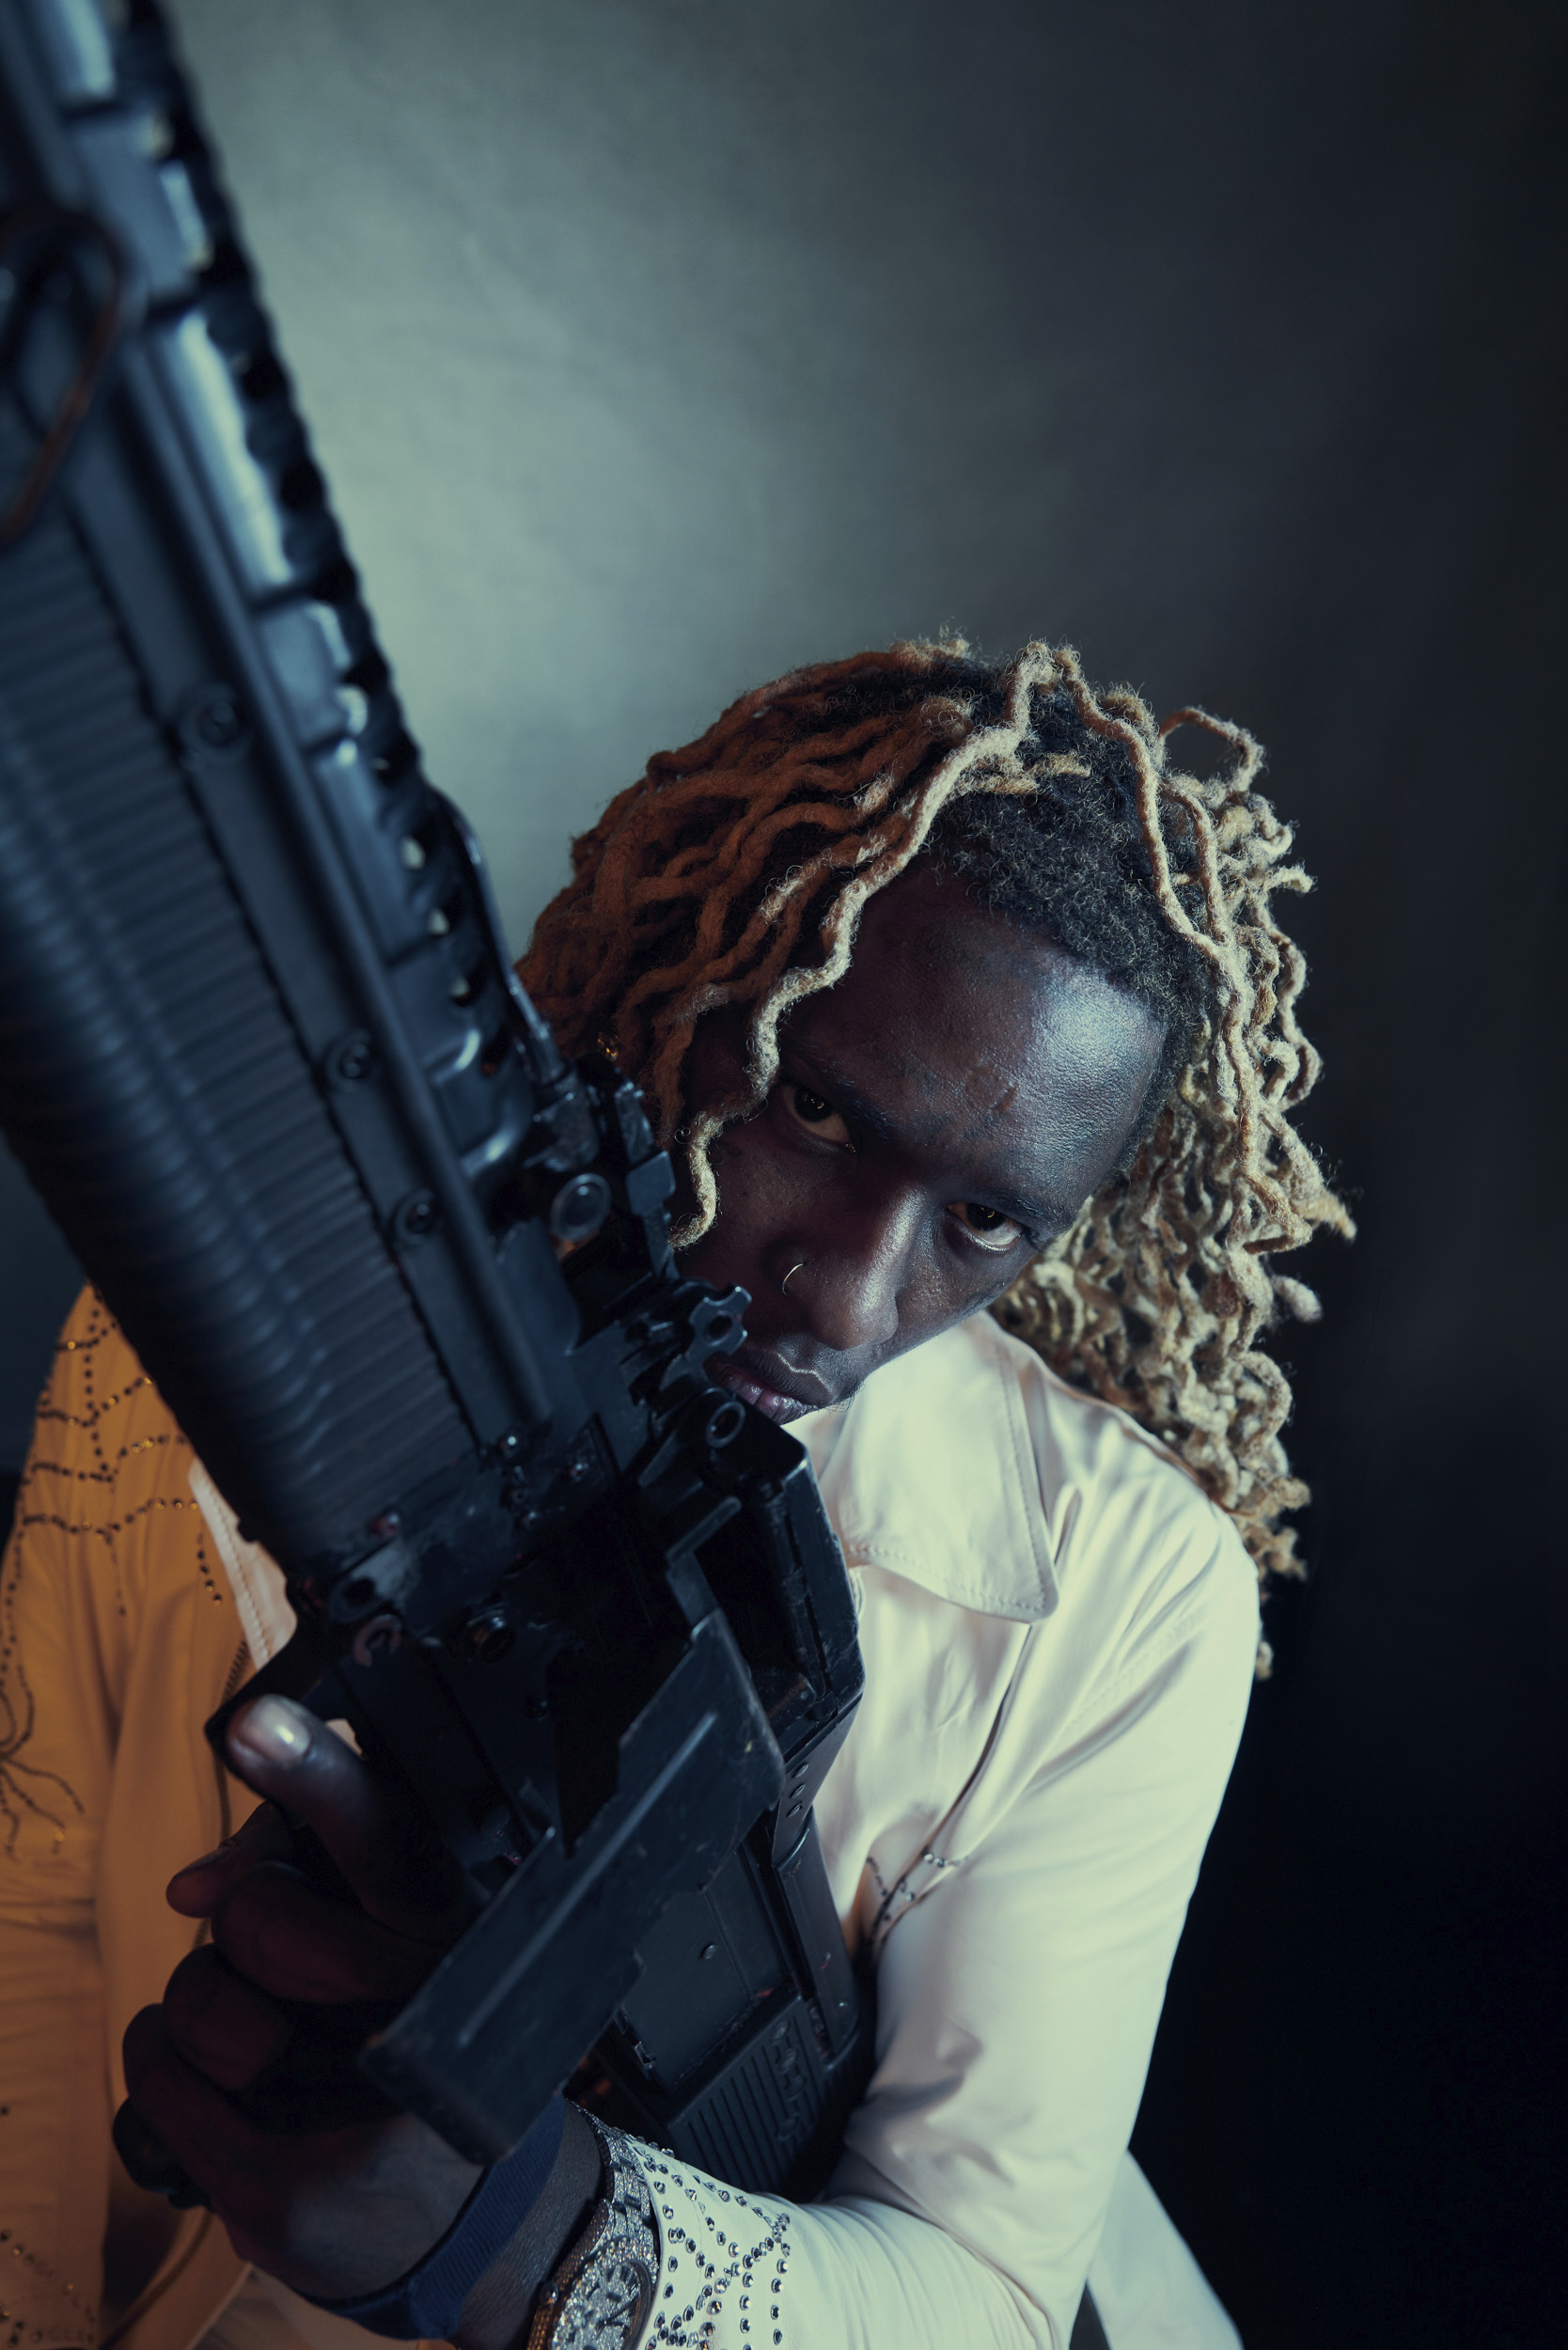 Saweetie, Young Thug & More Star In New 'Call of Duty: Warzone' Short Film